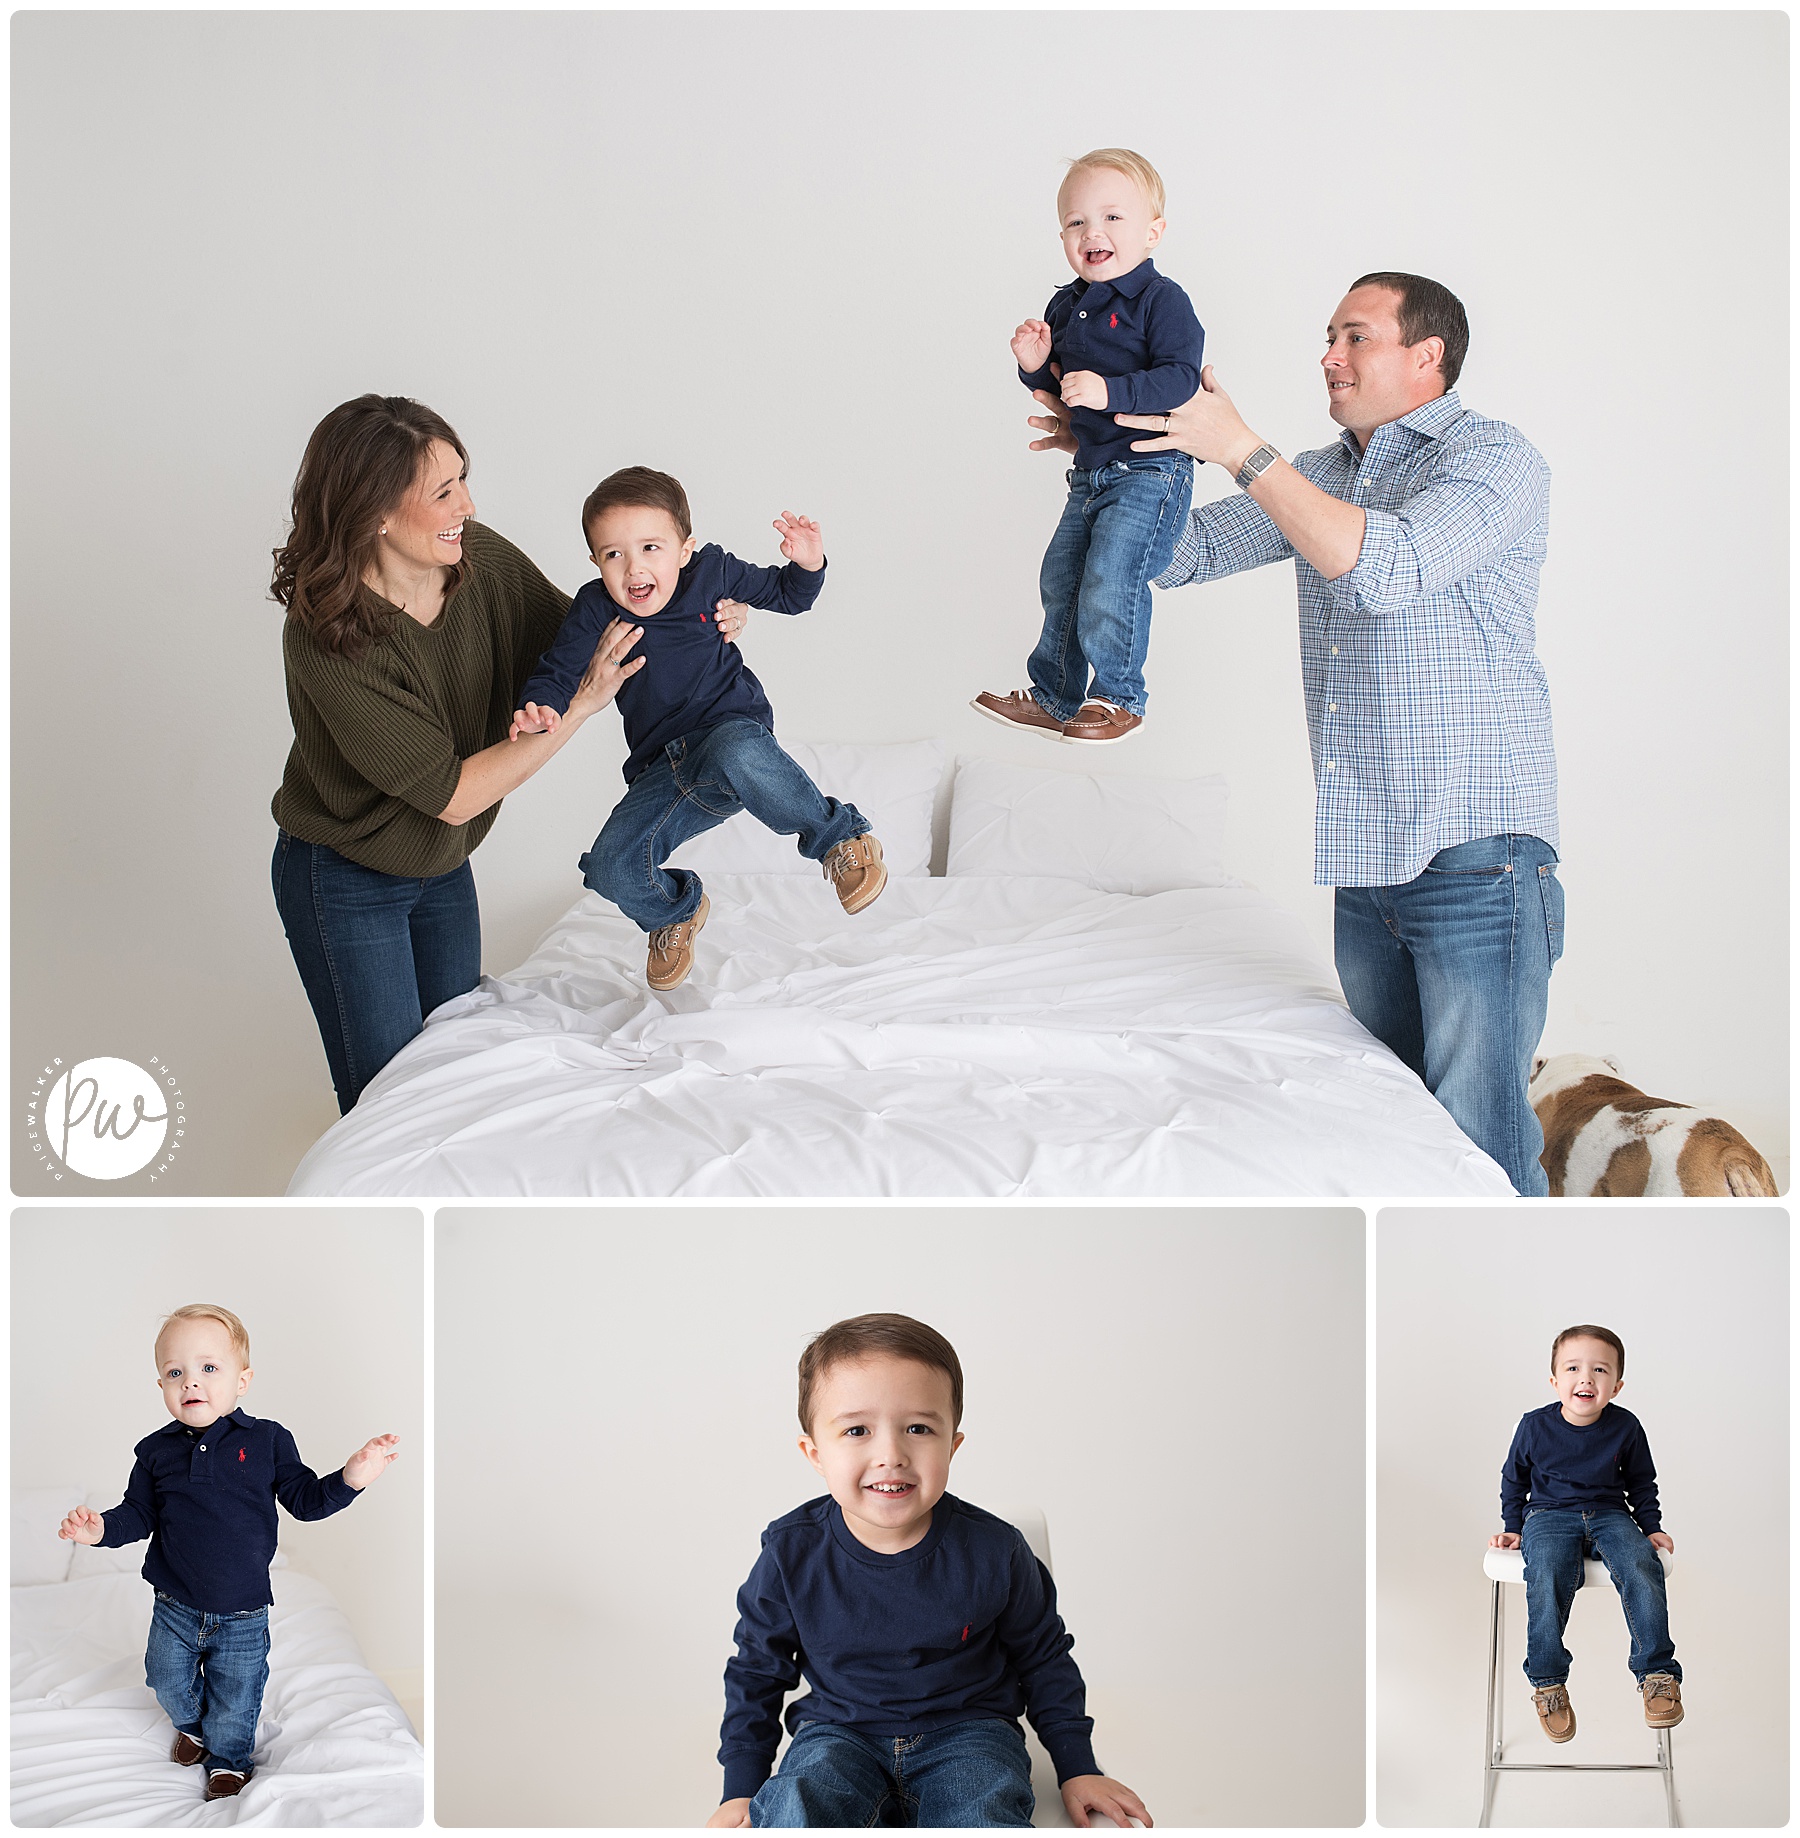 kids jumping on the bed with their parents